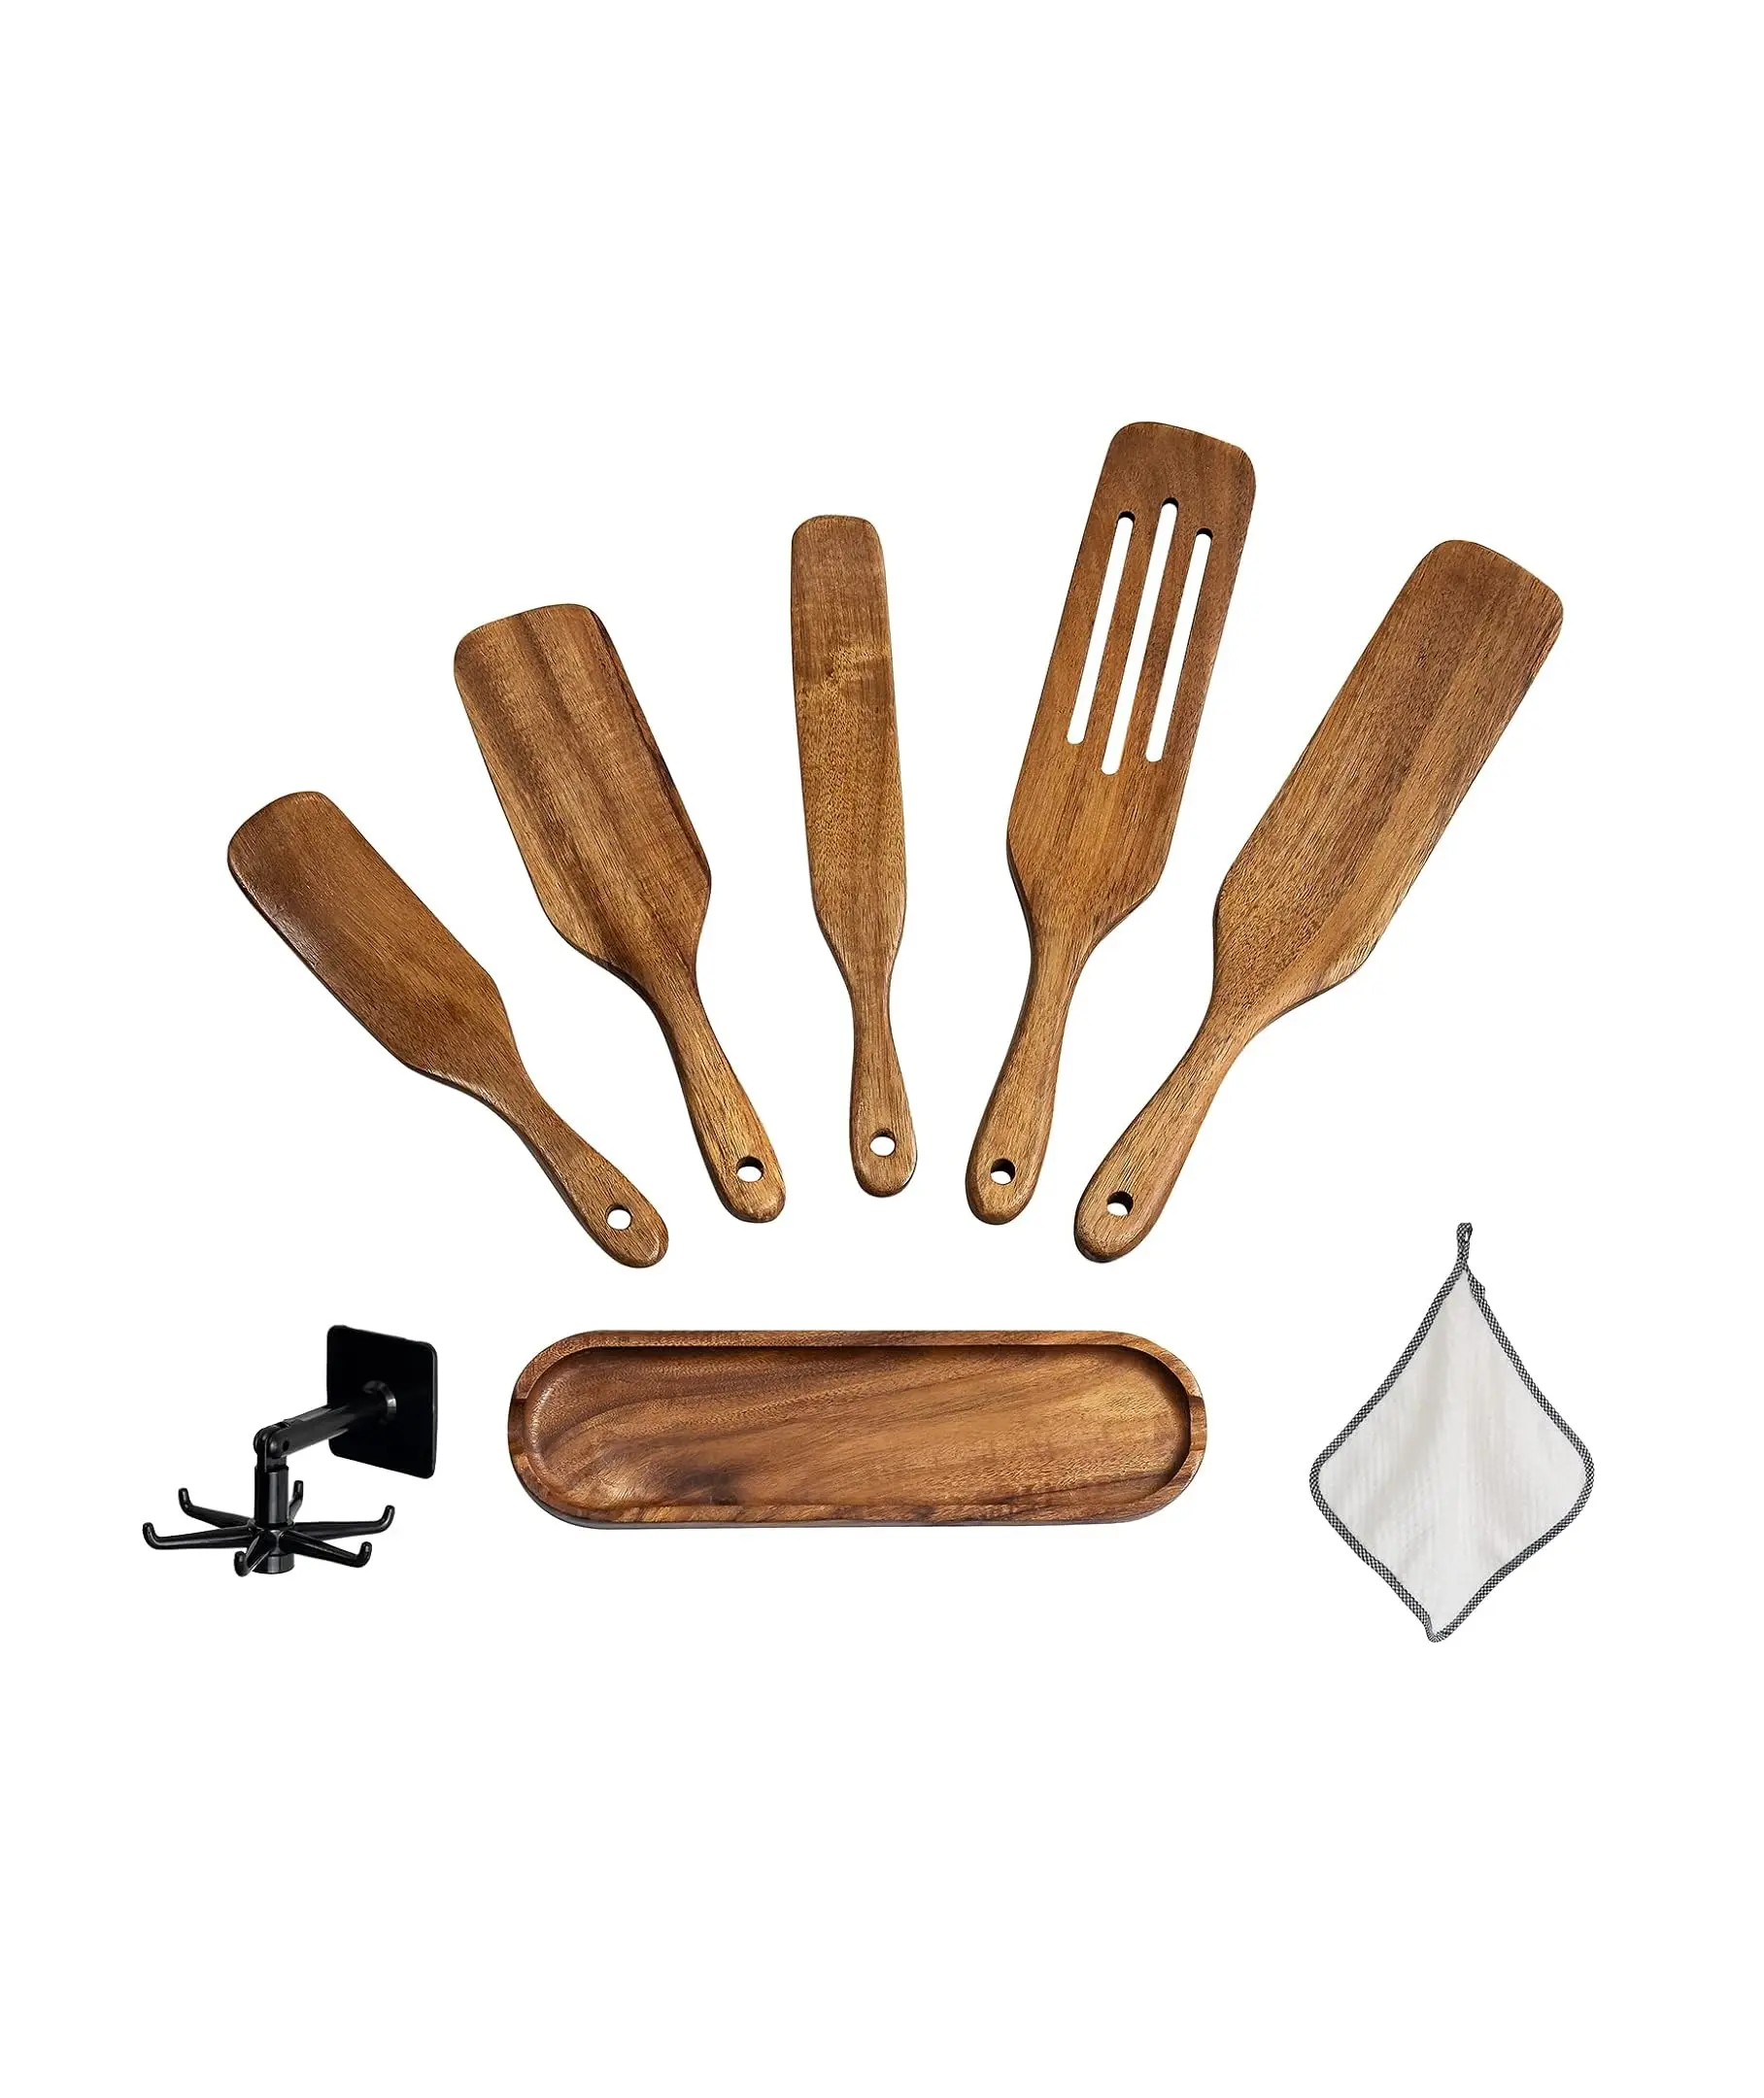 Spurtle Set - 6Pcs Wooden Spurtle Set Spatula Set - Wooden Spoons for Cooking - Spurtles Kitchen Tools As Seen On TV